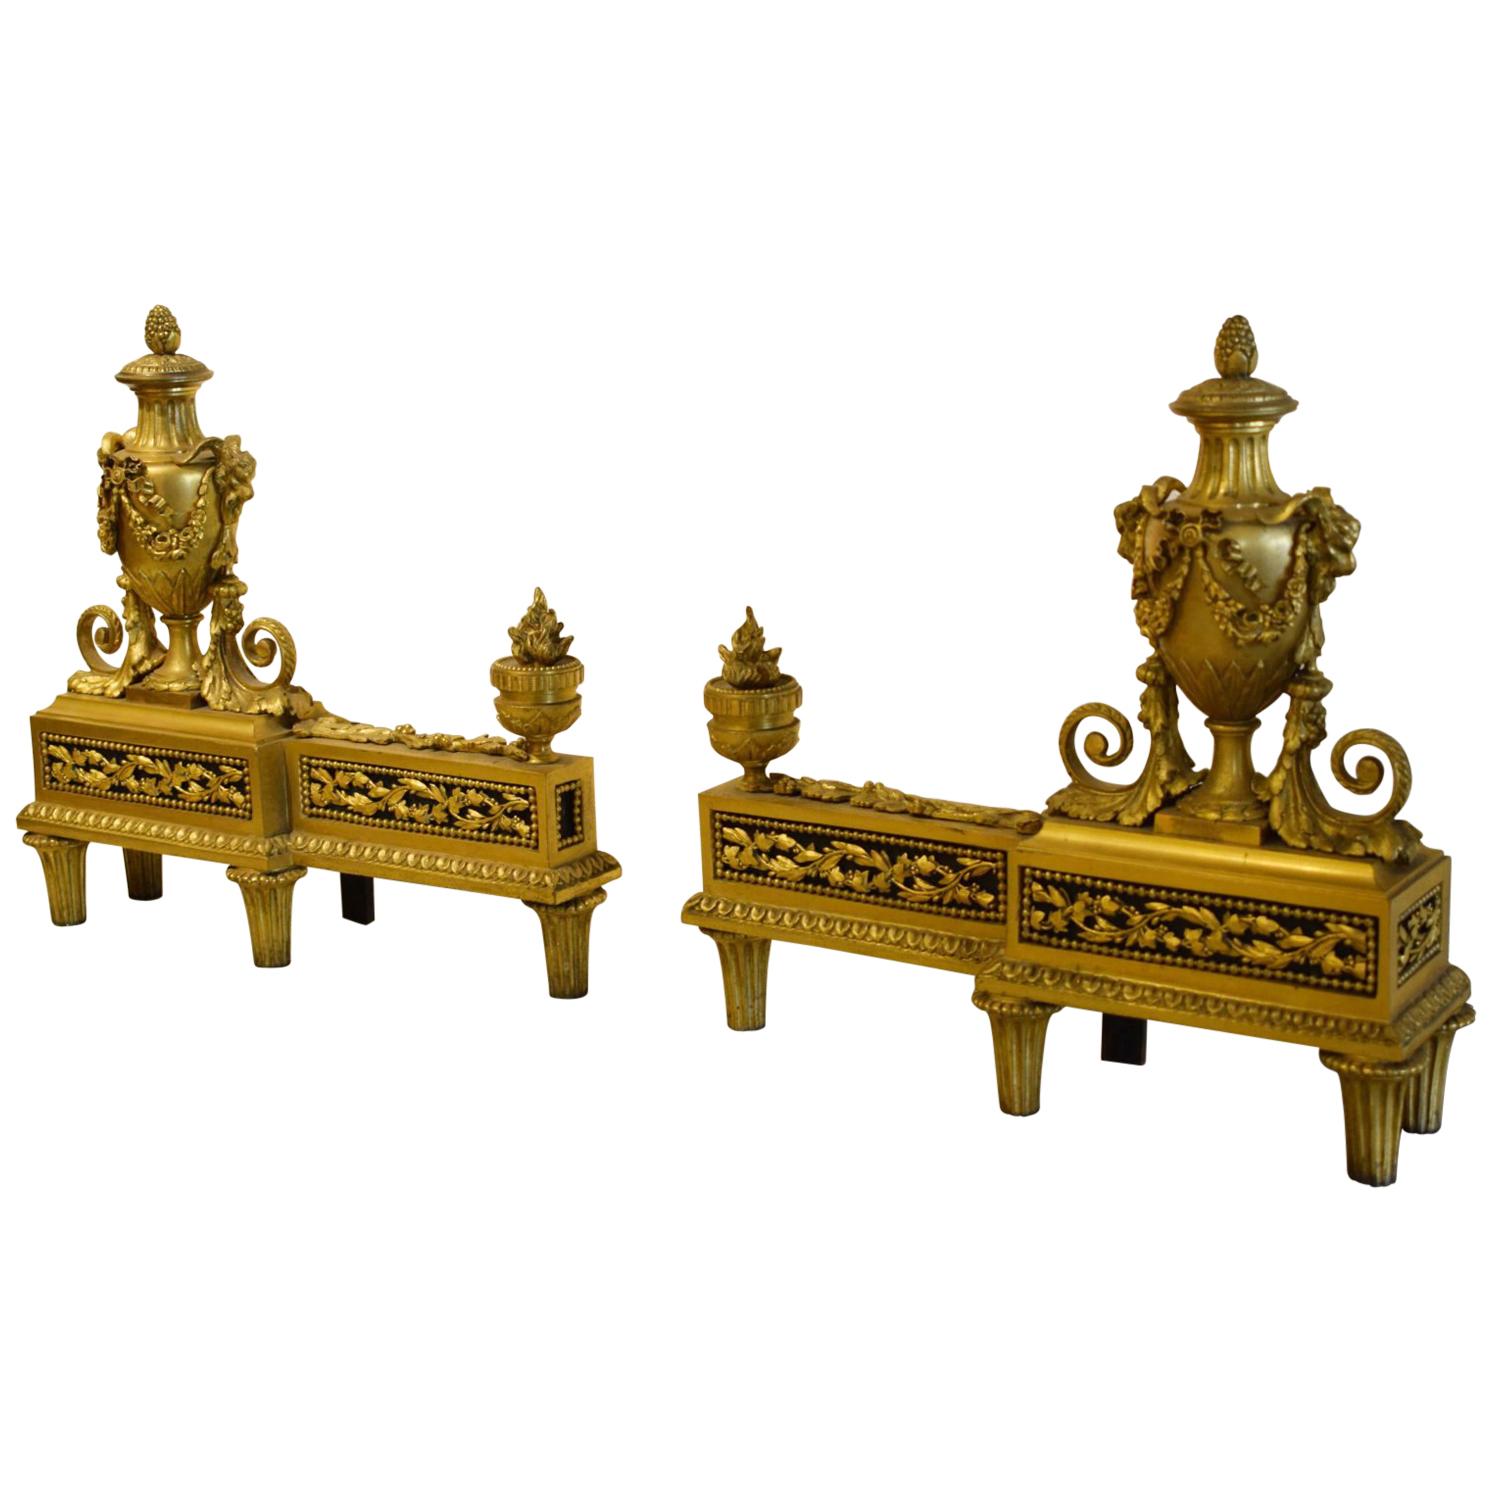 19Th Century, Pair of French Louis XVI style gilt bronze Fireplace Chenets